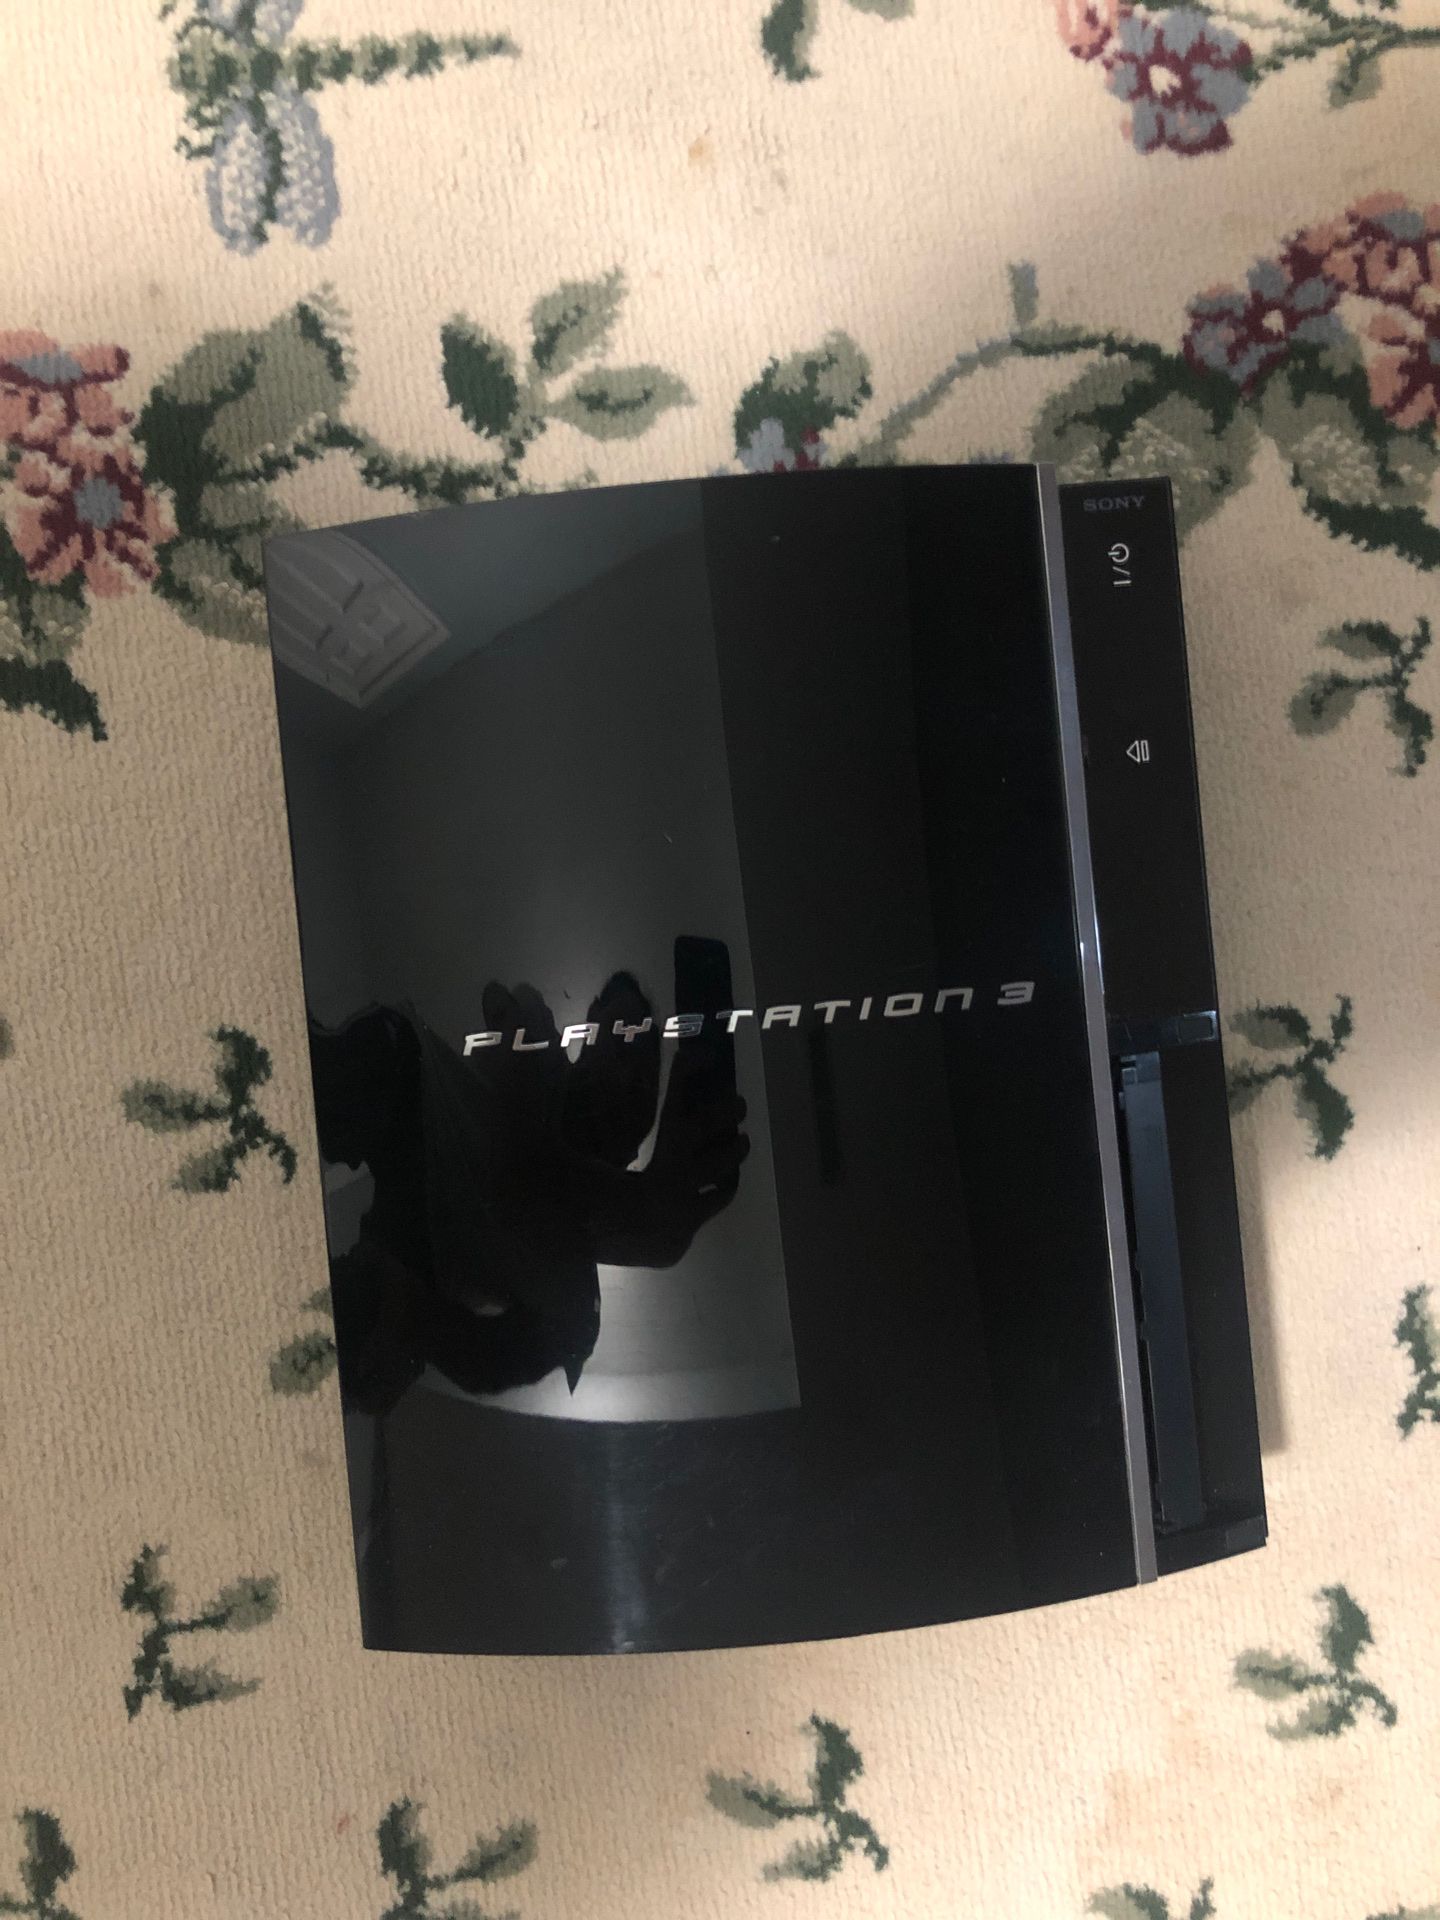 Sony Playstation 3 w/ Controller and Games